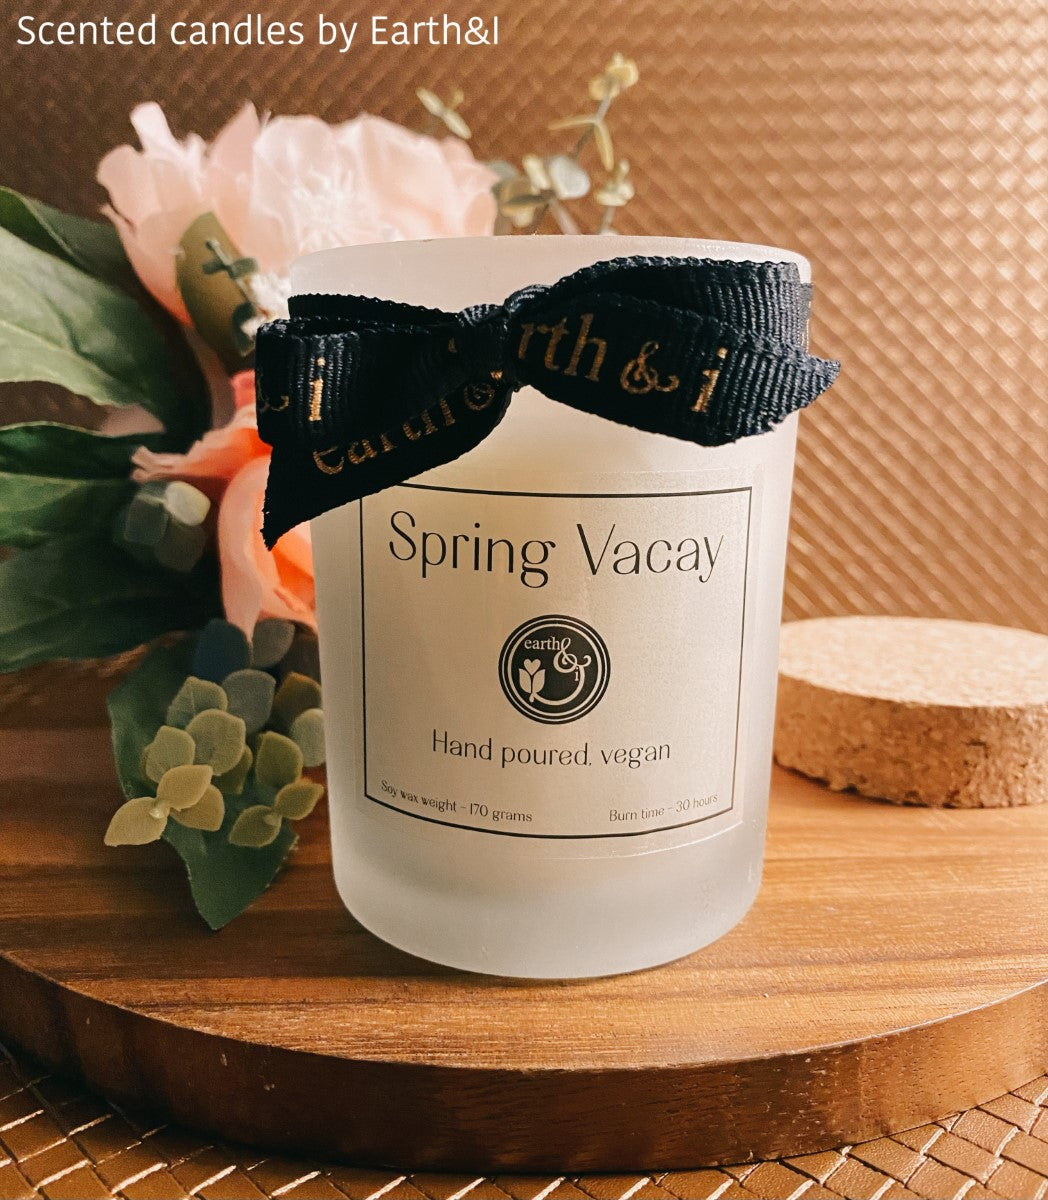 Spring Vacay Jasmine Scented Hand Poured Vegan Candle